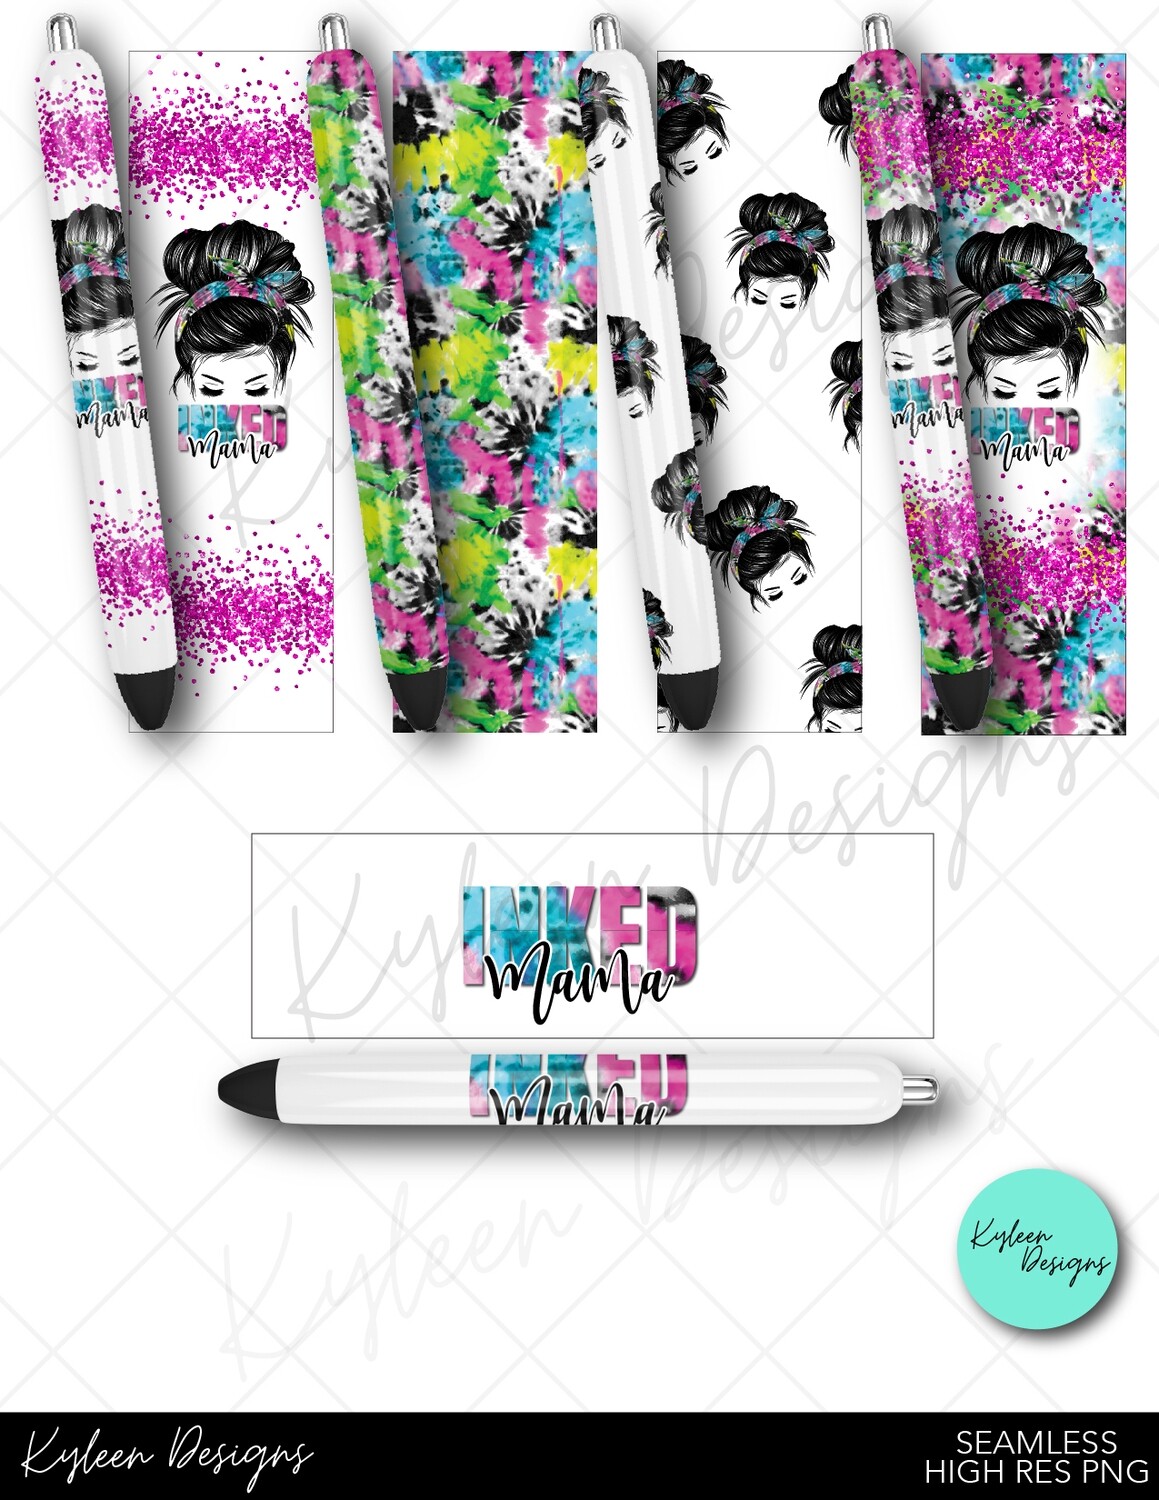 inked mama pen wrappers™  for waterslide High Res PNG file